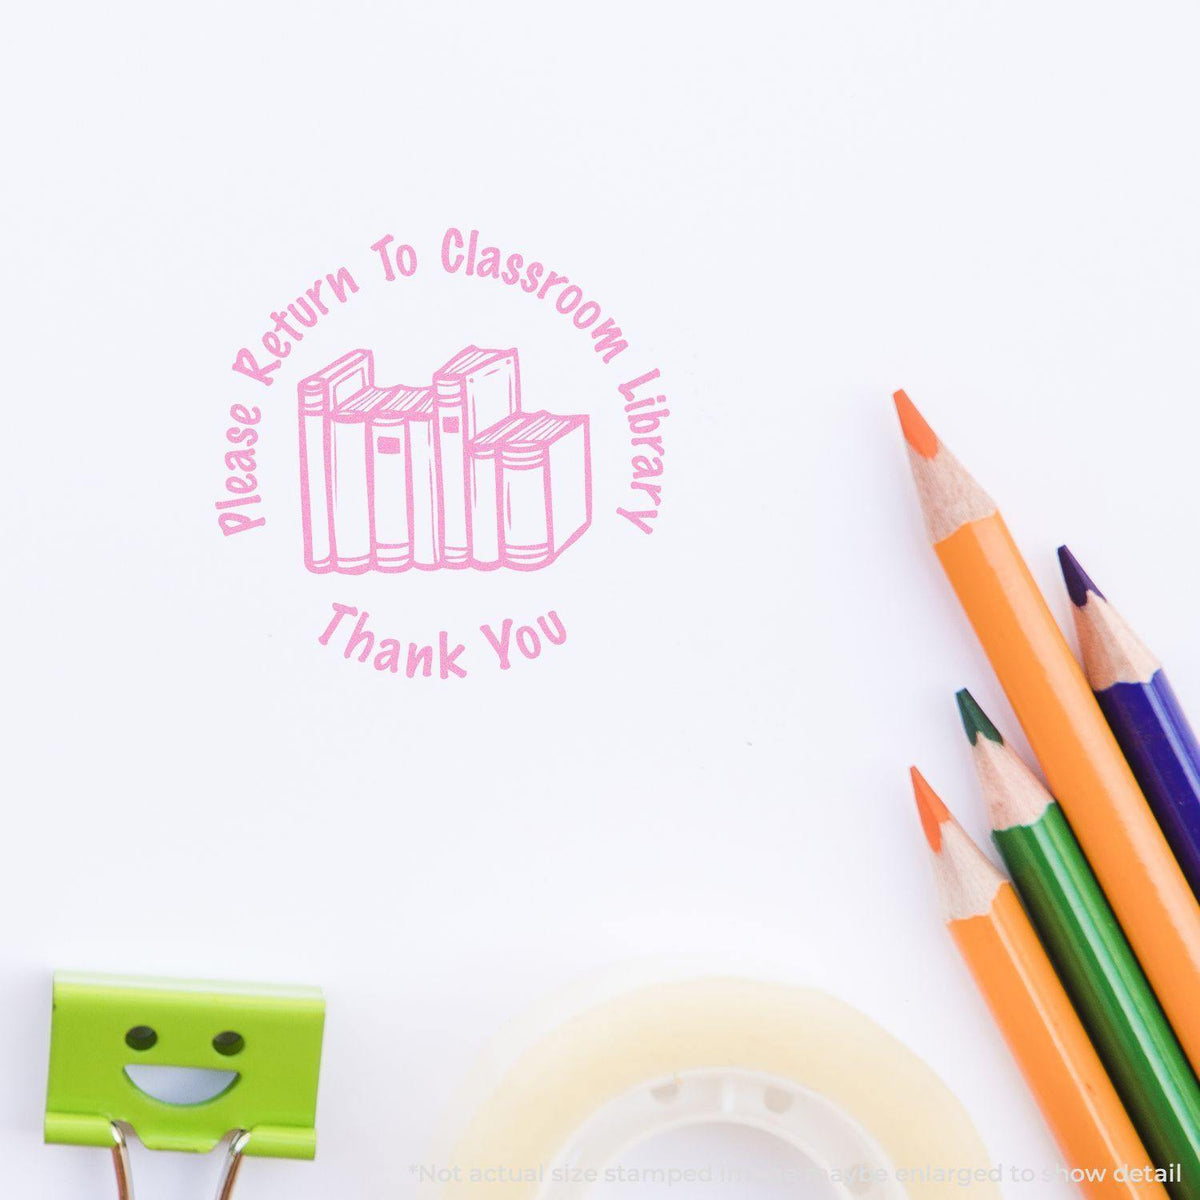 Round Please Return to Classroom Rubber Stamp - Engineer Seal Stamps - Brand_Acorn, Impression Size_Small, Stamp Type_Regular Stamp, Type of Use_Teacher